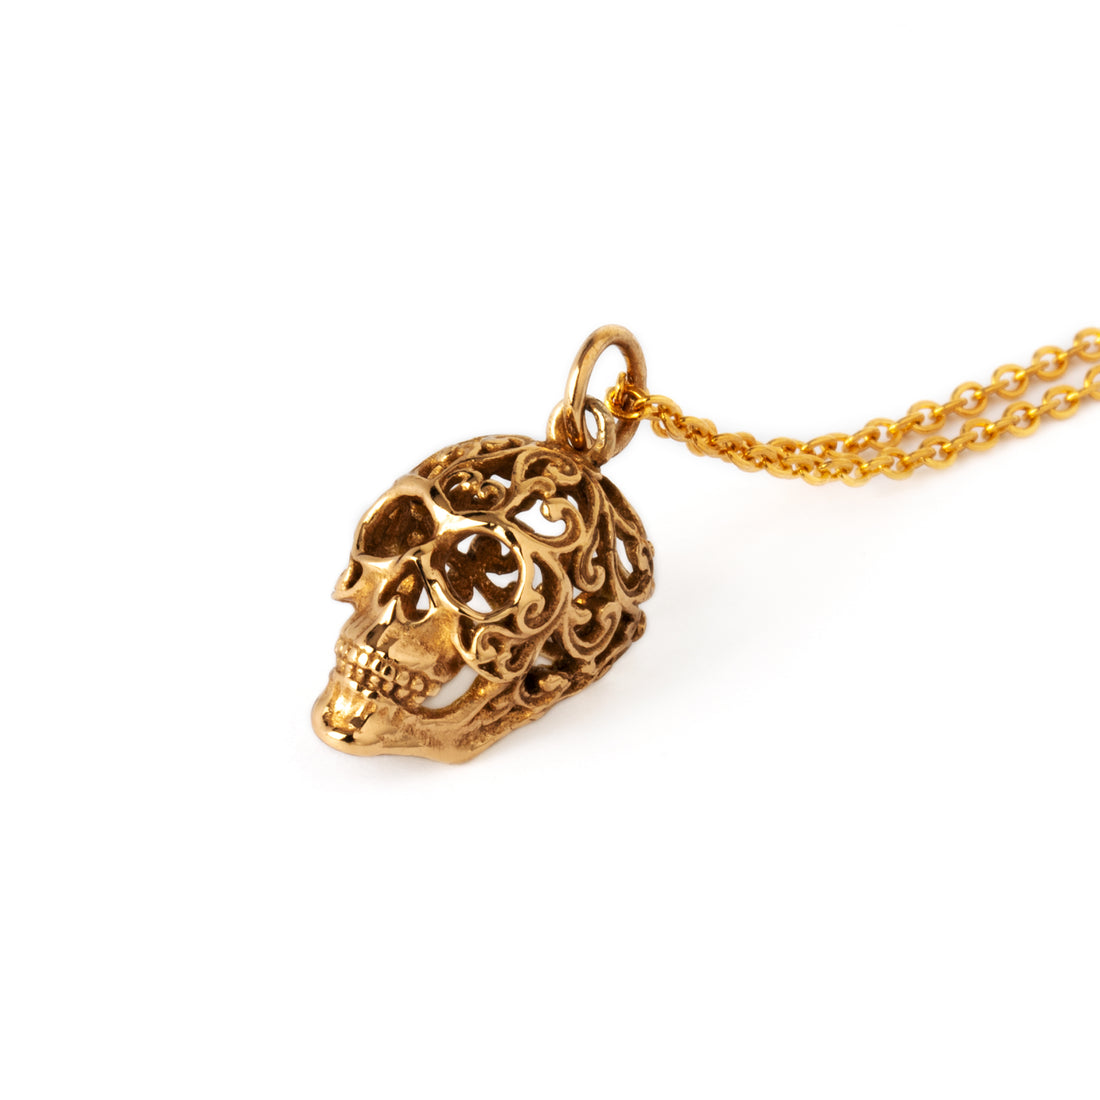 Bronze sugar skull charm on a chain right side front view